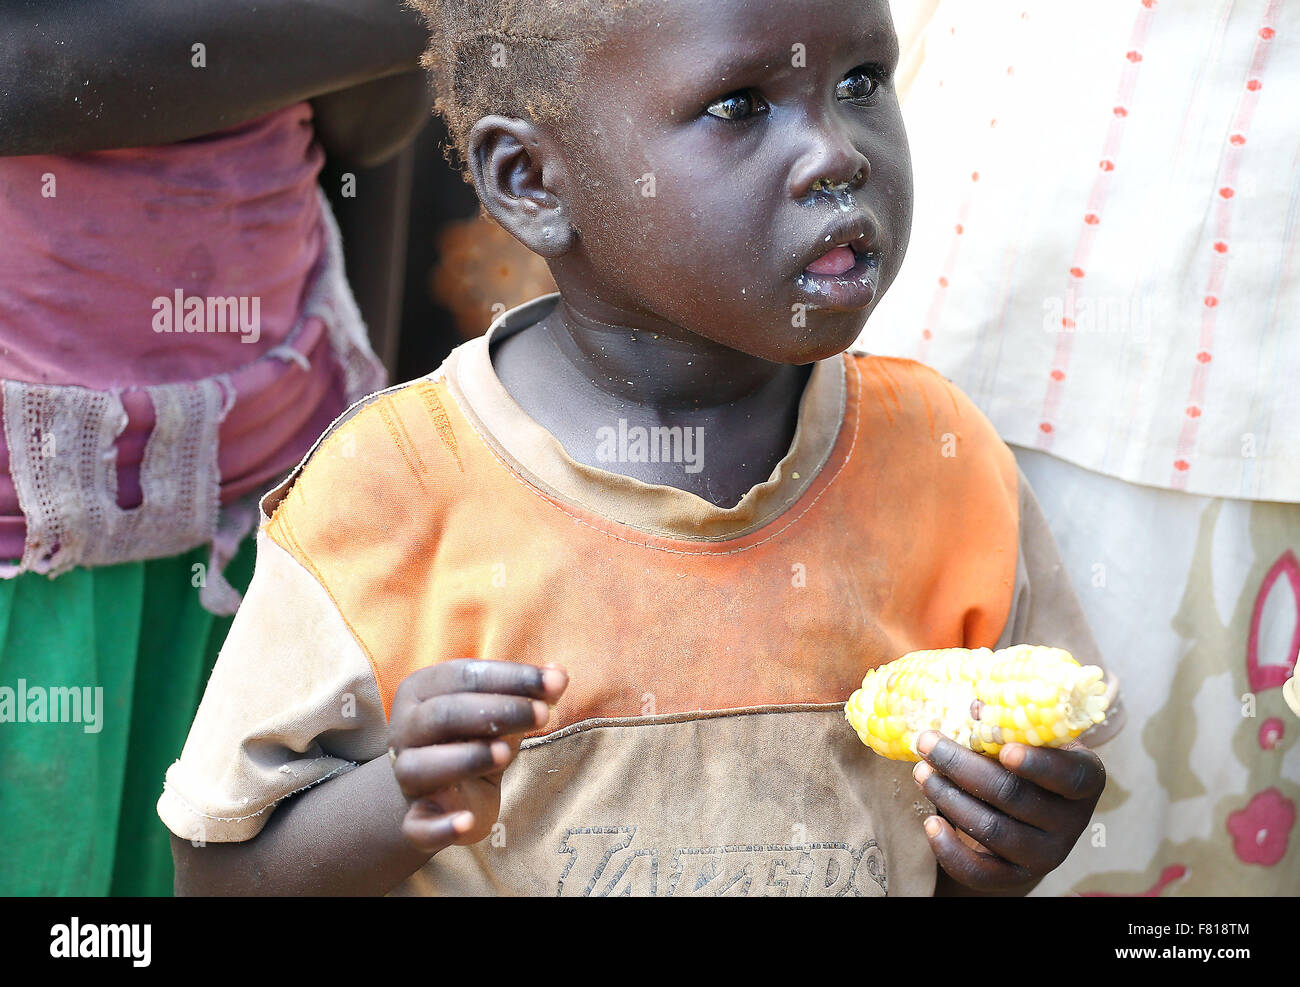 A young girl eats corn an Internally Displaced Persons camp in Turalei, Warrap State of South Sudan Sept 19, 2015. World Vision has been been working in this hard to reach region since 1989 providing humanitarian relief and development assistance. 16th Sep, 2015. Photo Andre Forget © ©/ZUMA Wire/Alamy Live News Stock Photo